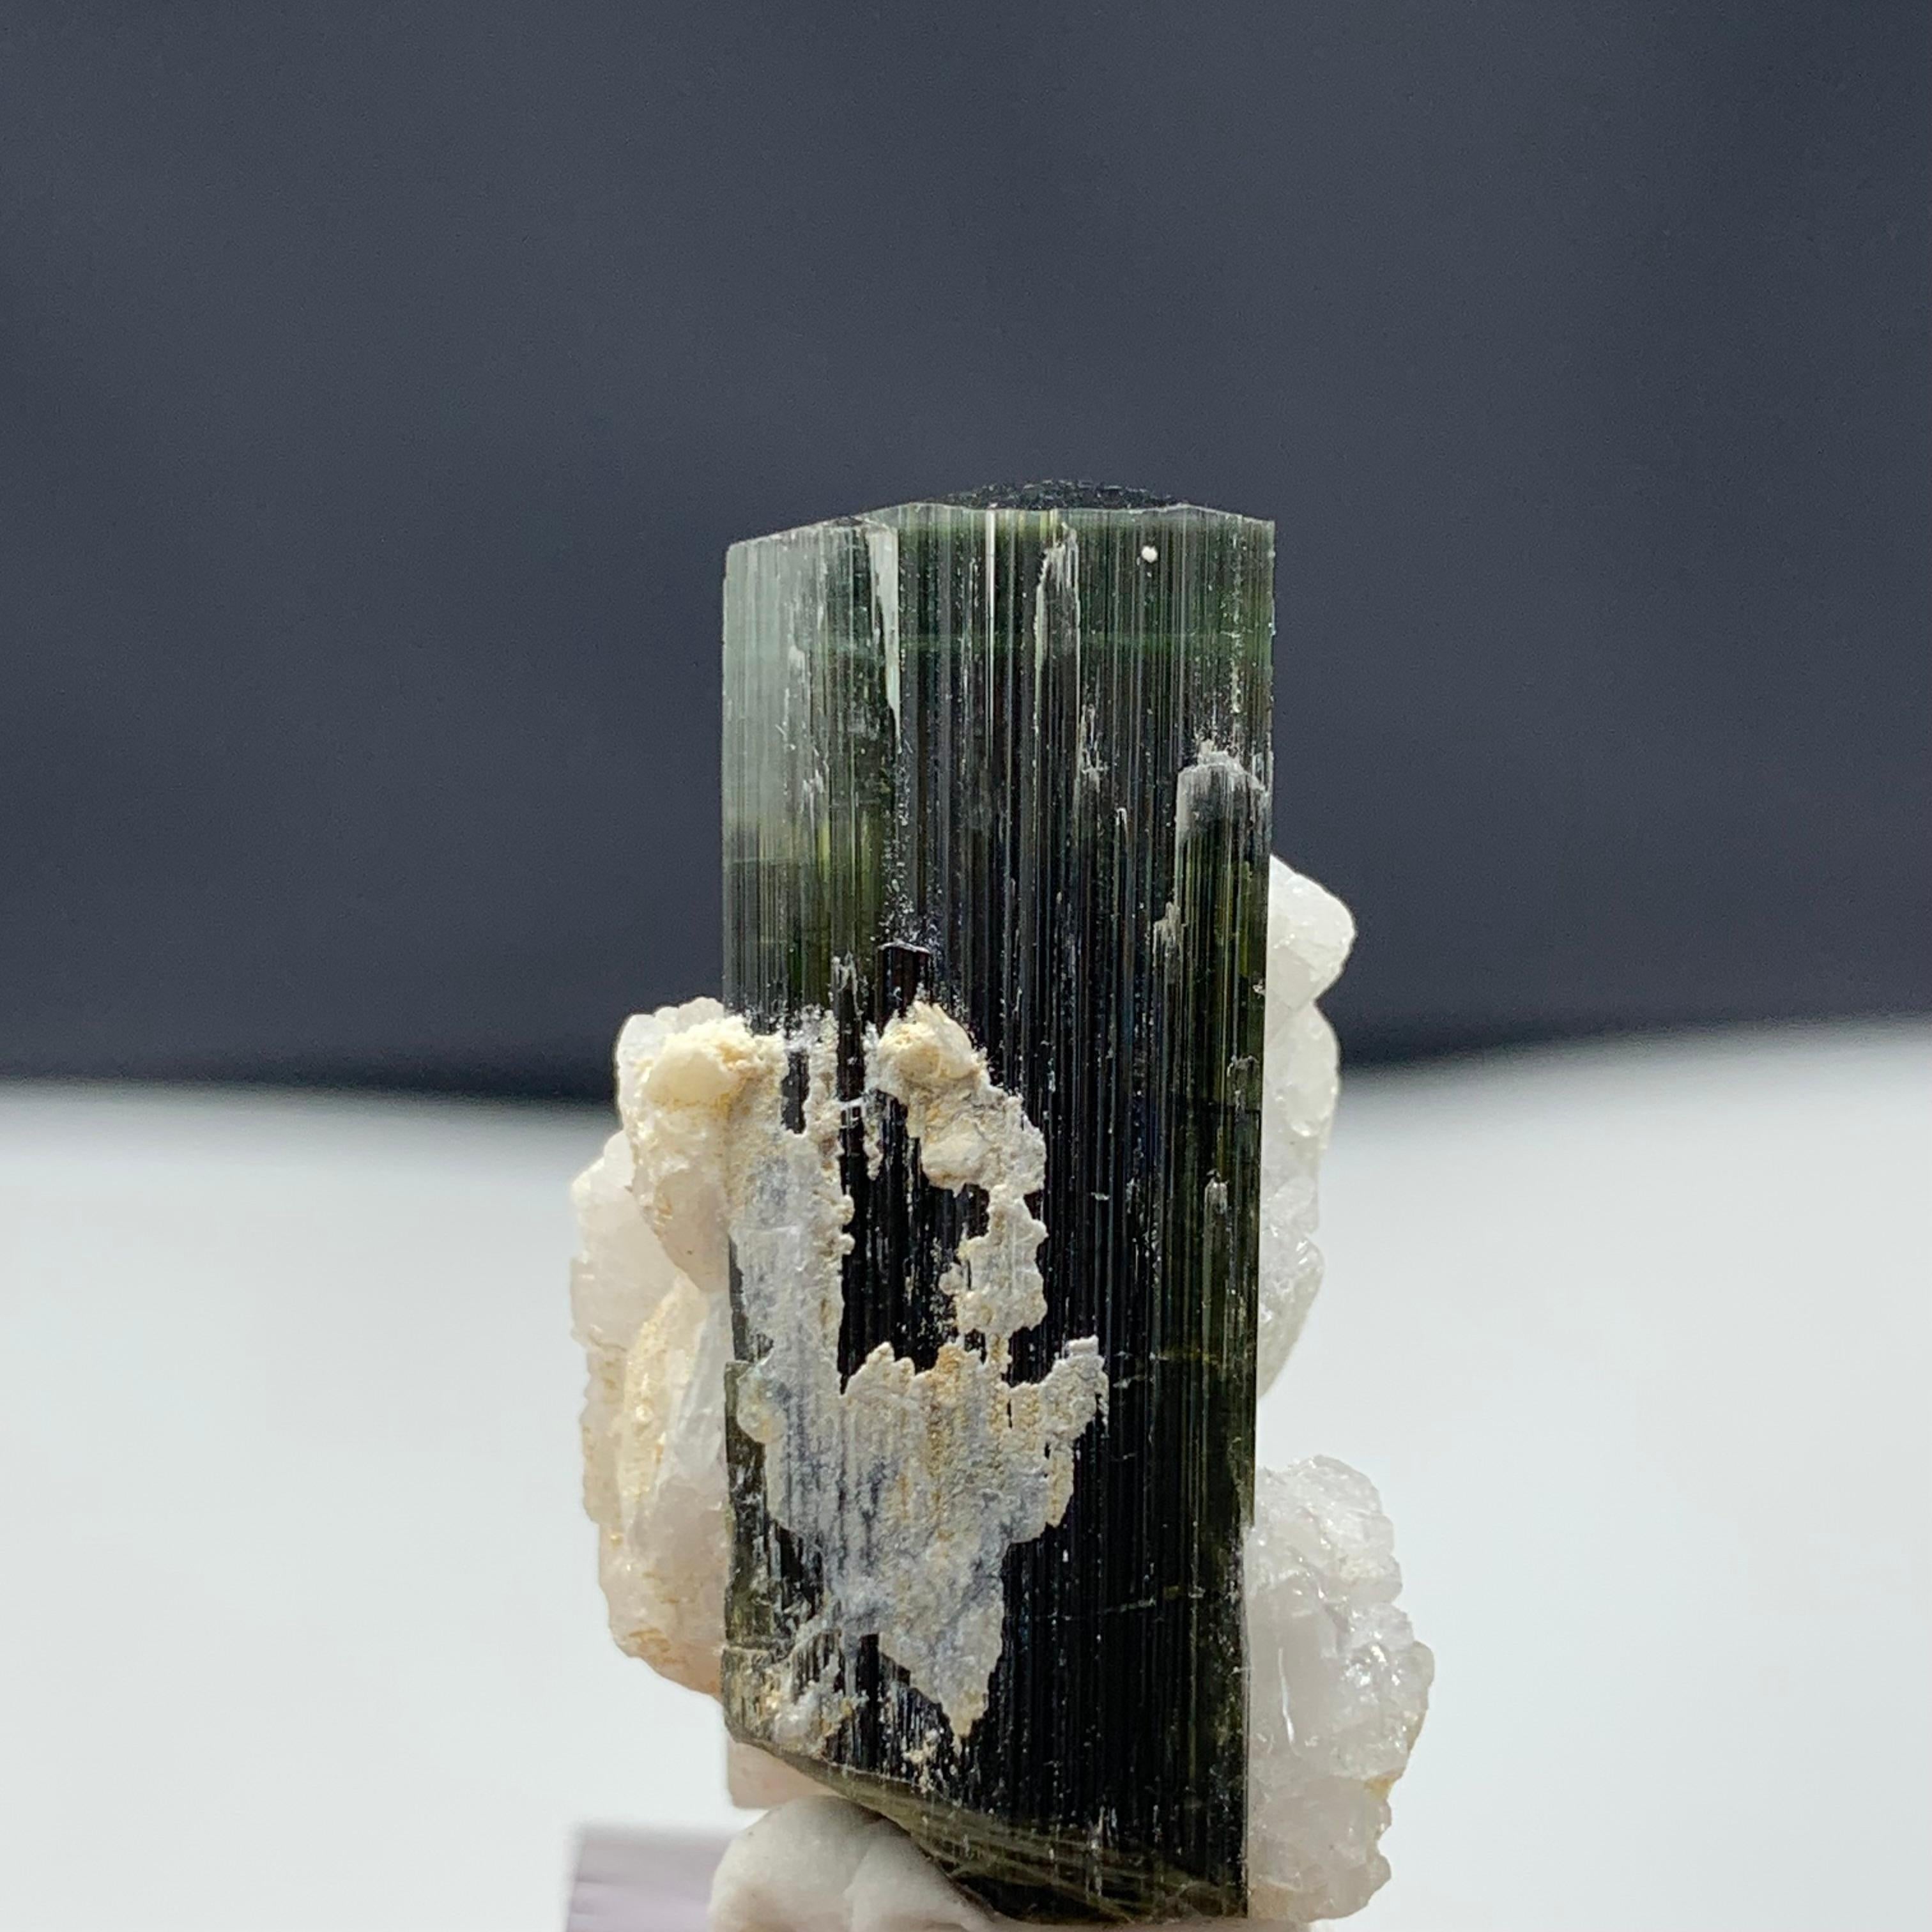 10.45 Gram Lovely Tourmaline Specimen From Stak Nala, Skardu, Pakistan 
Weight: 10.45 Gram 
Dimension: 3.2 x 1.9 x 1.5 Cm
Origin: Skardu, Pakistan 

Tourmaline is a crystalline silicate mineral group in which boron is compounded with elements such